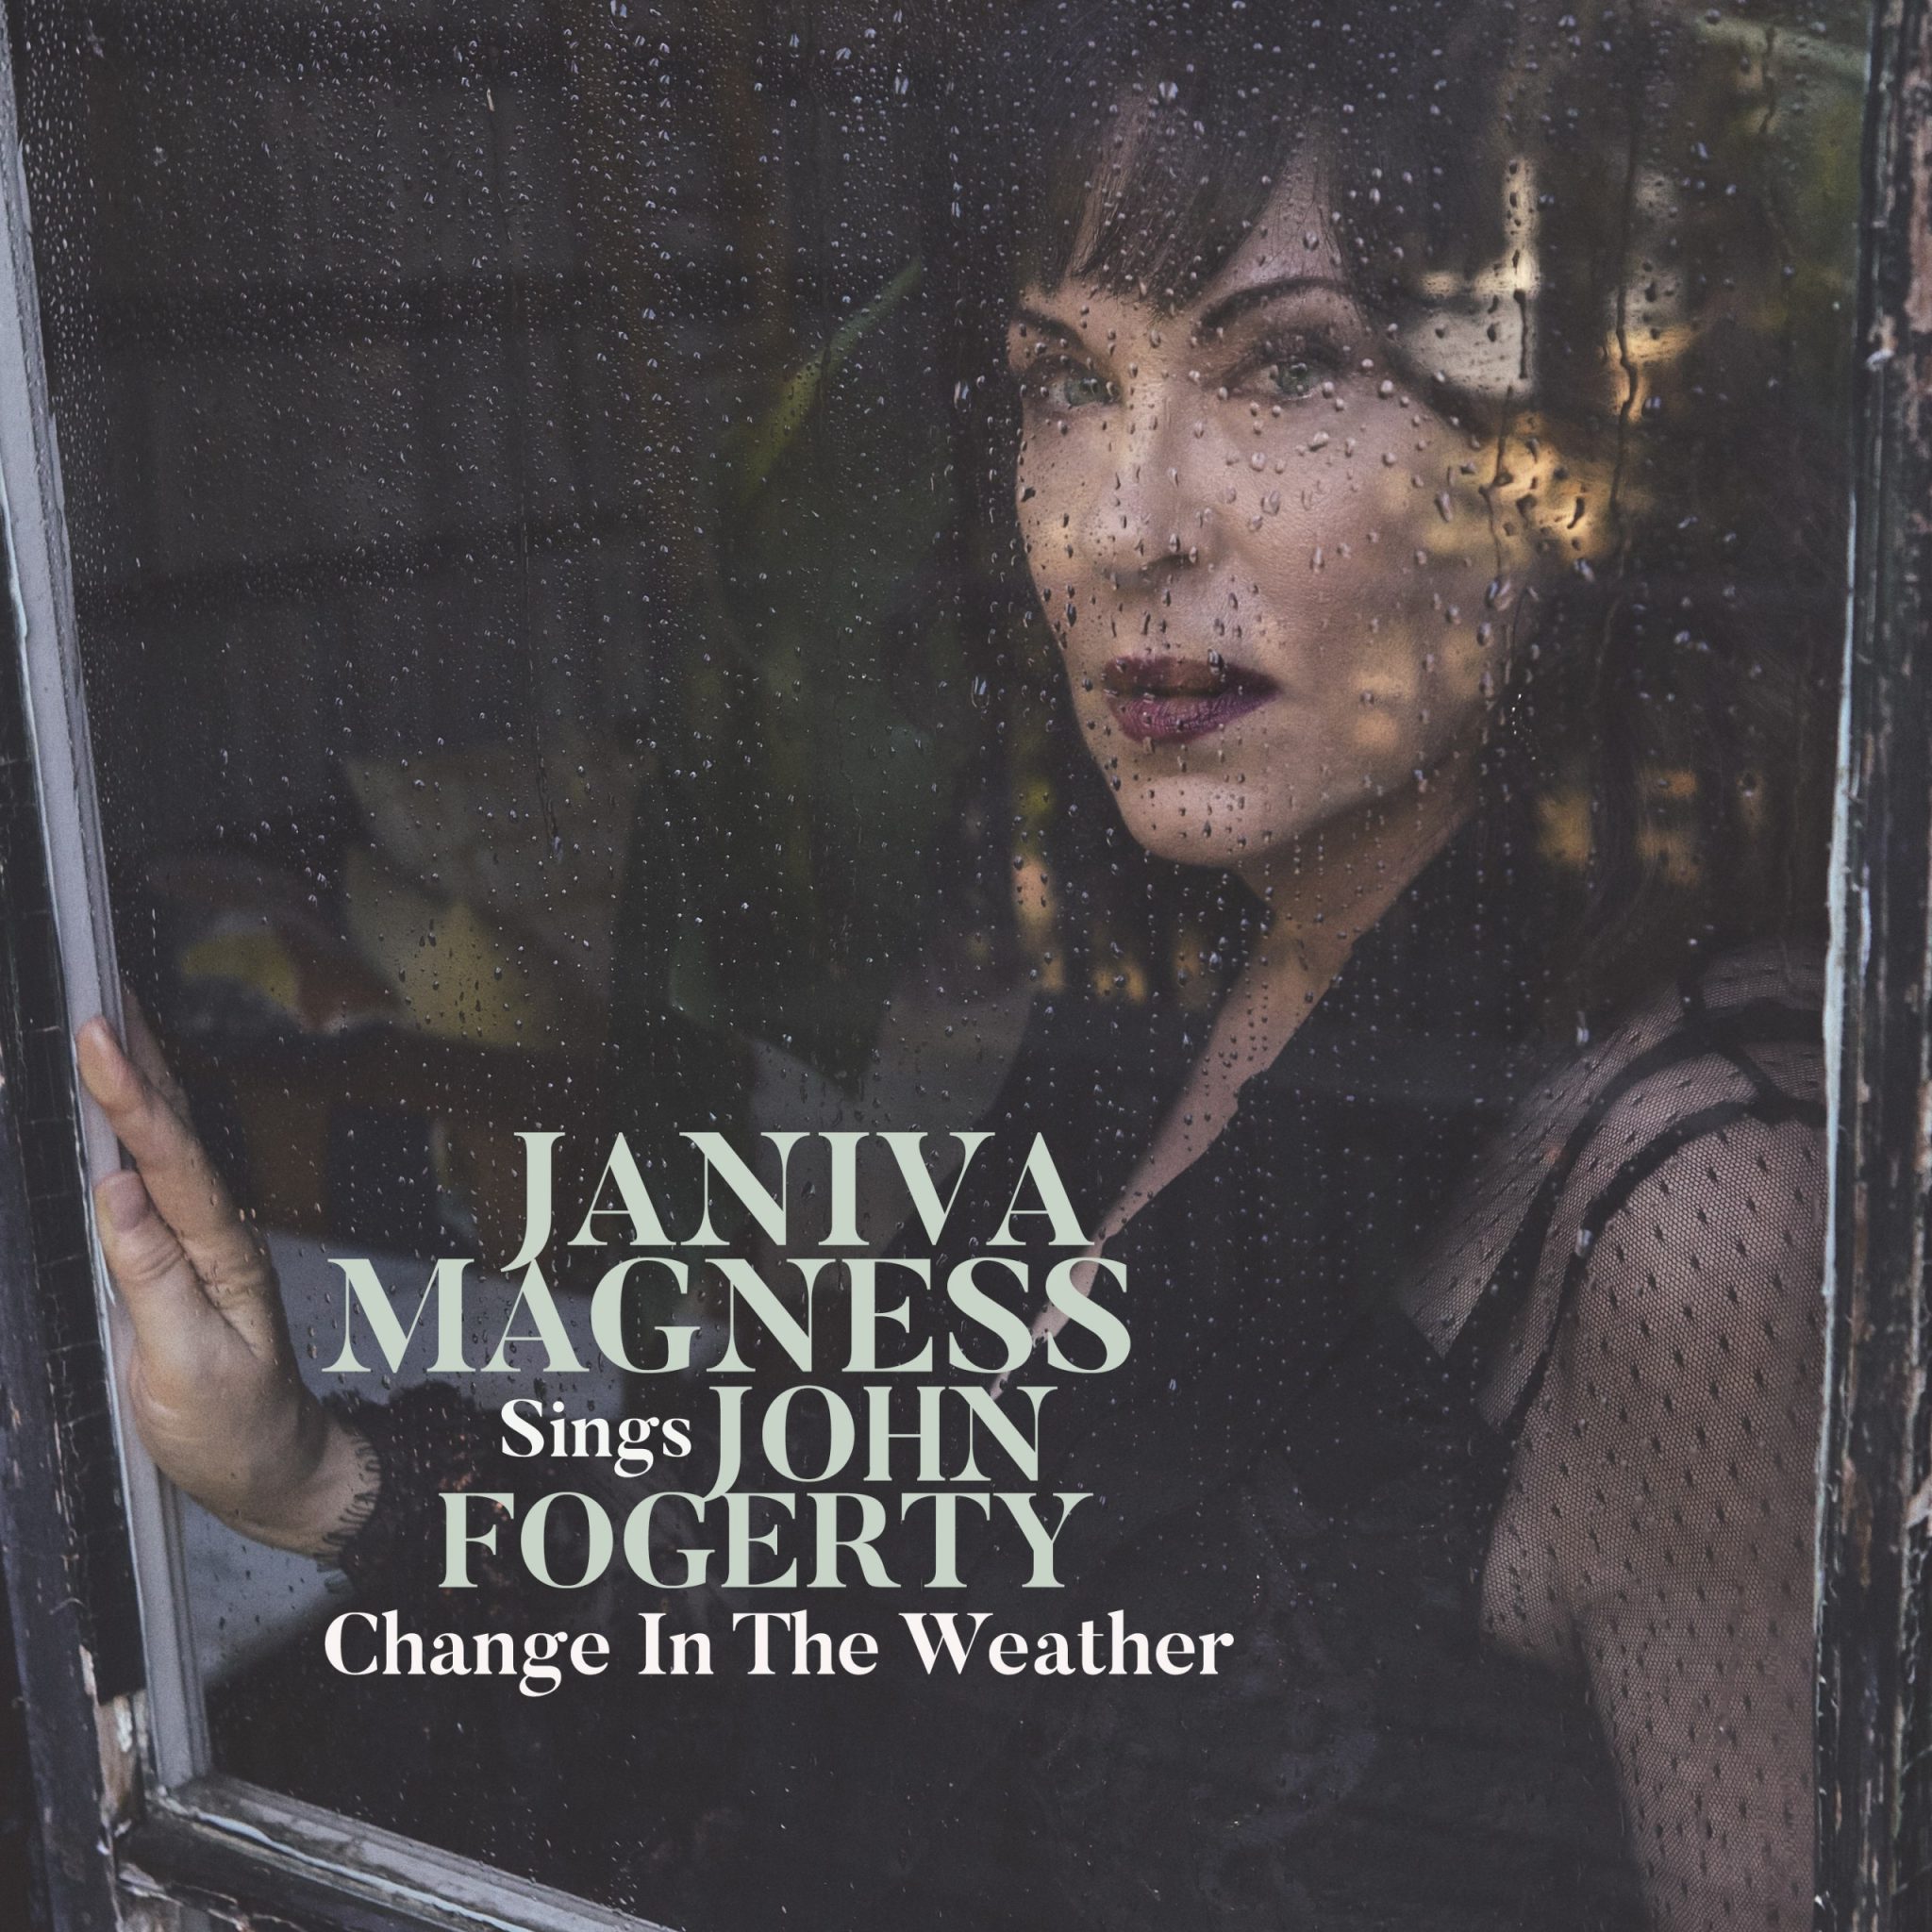 JANIVA MAGNESS Sings John Fogerty-Change in the weather